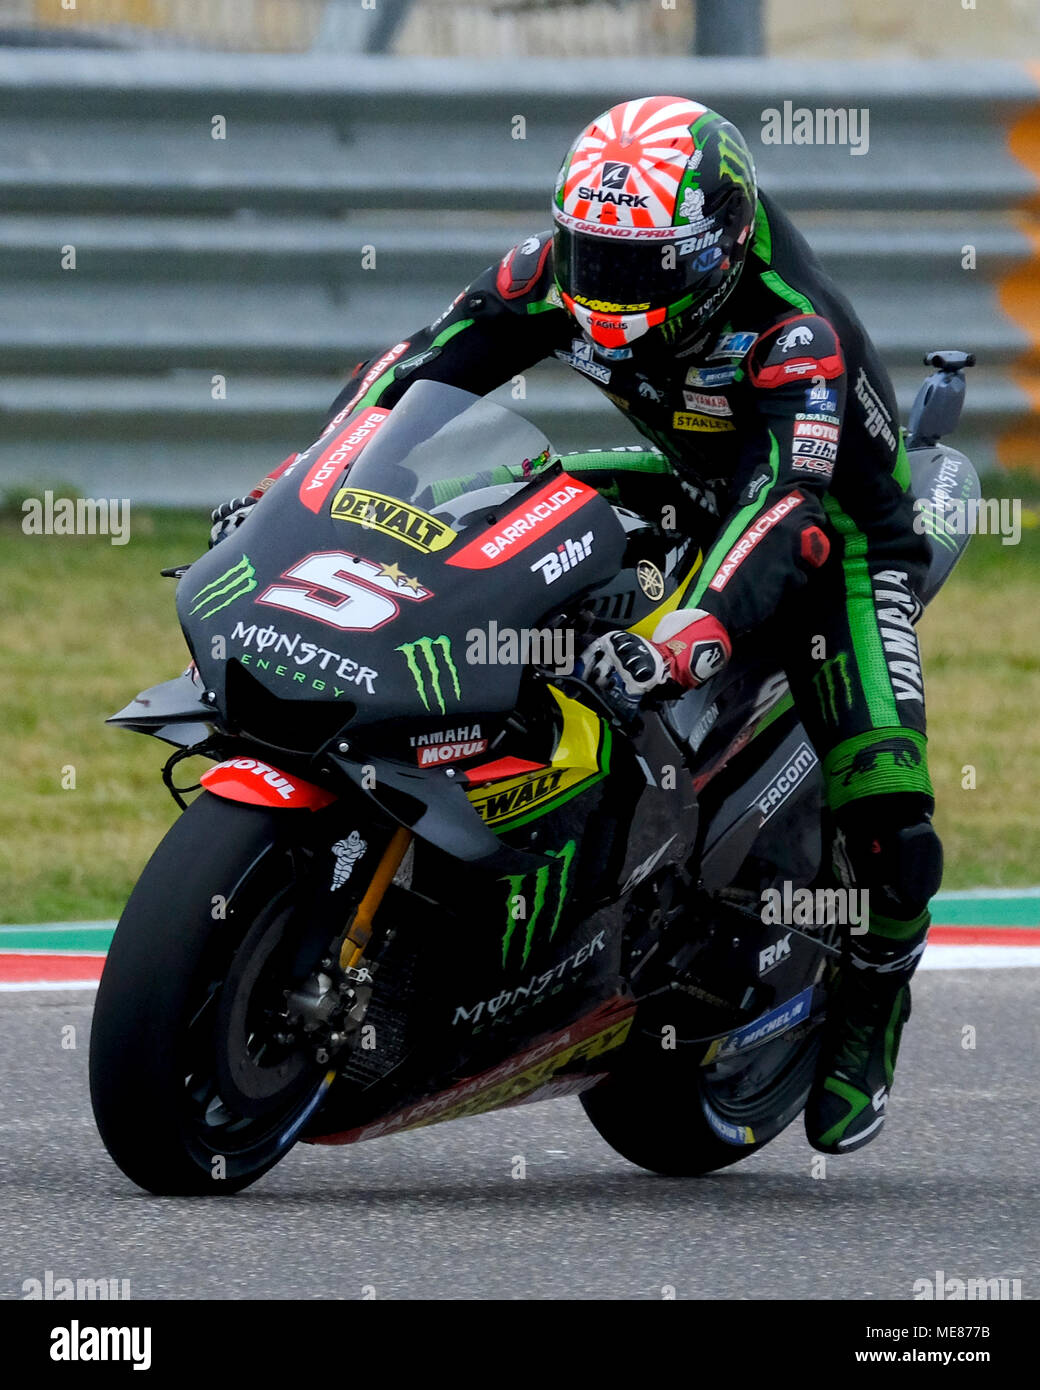 Texas, USA. April 21, 2018. Johann Zarco #5 of Monster Yamaha Tech in  action during the qualifying round for MotoGP at the Circuit of the  Americas in Austin Texas.Robert Backman/Cal Sport Media.